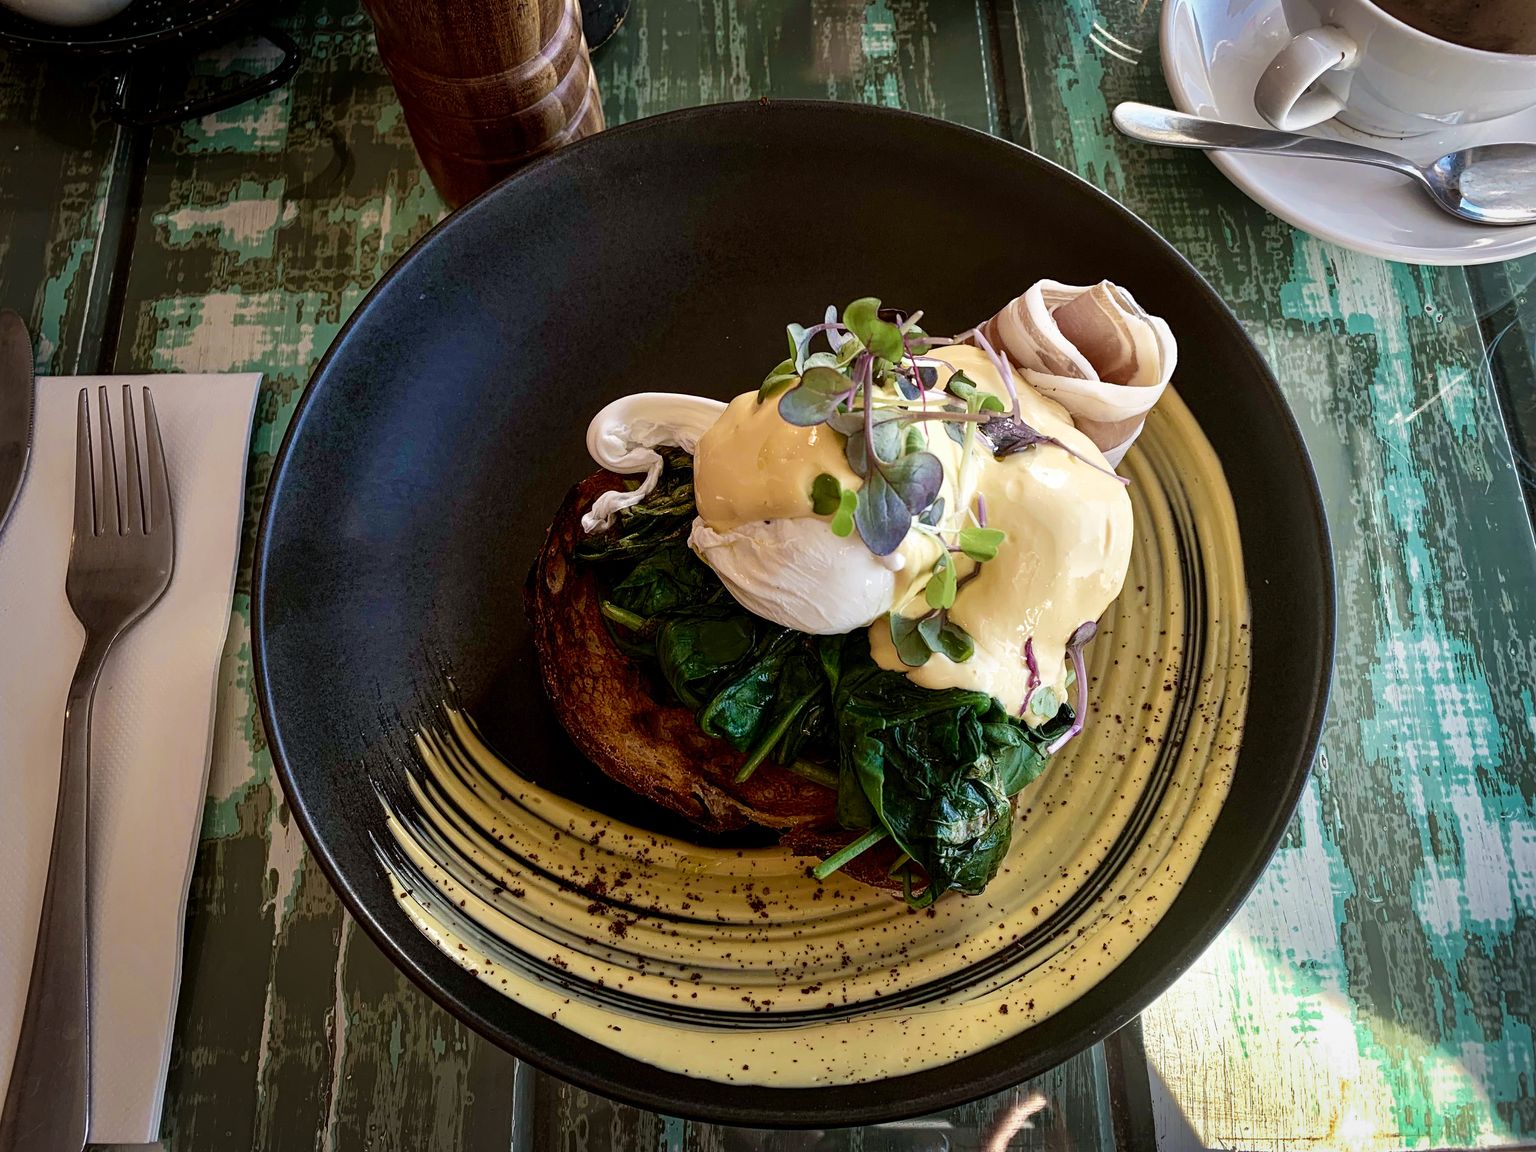 A plate of Eggs Benedict in the cafe at Foxton Beach sitting on the distressed wood table. The presentation is elegant, with the prosciutto neatly wrapped into a cylinder and the hollandaise garnished with micro greens.